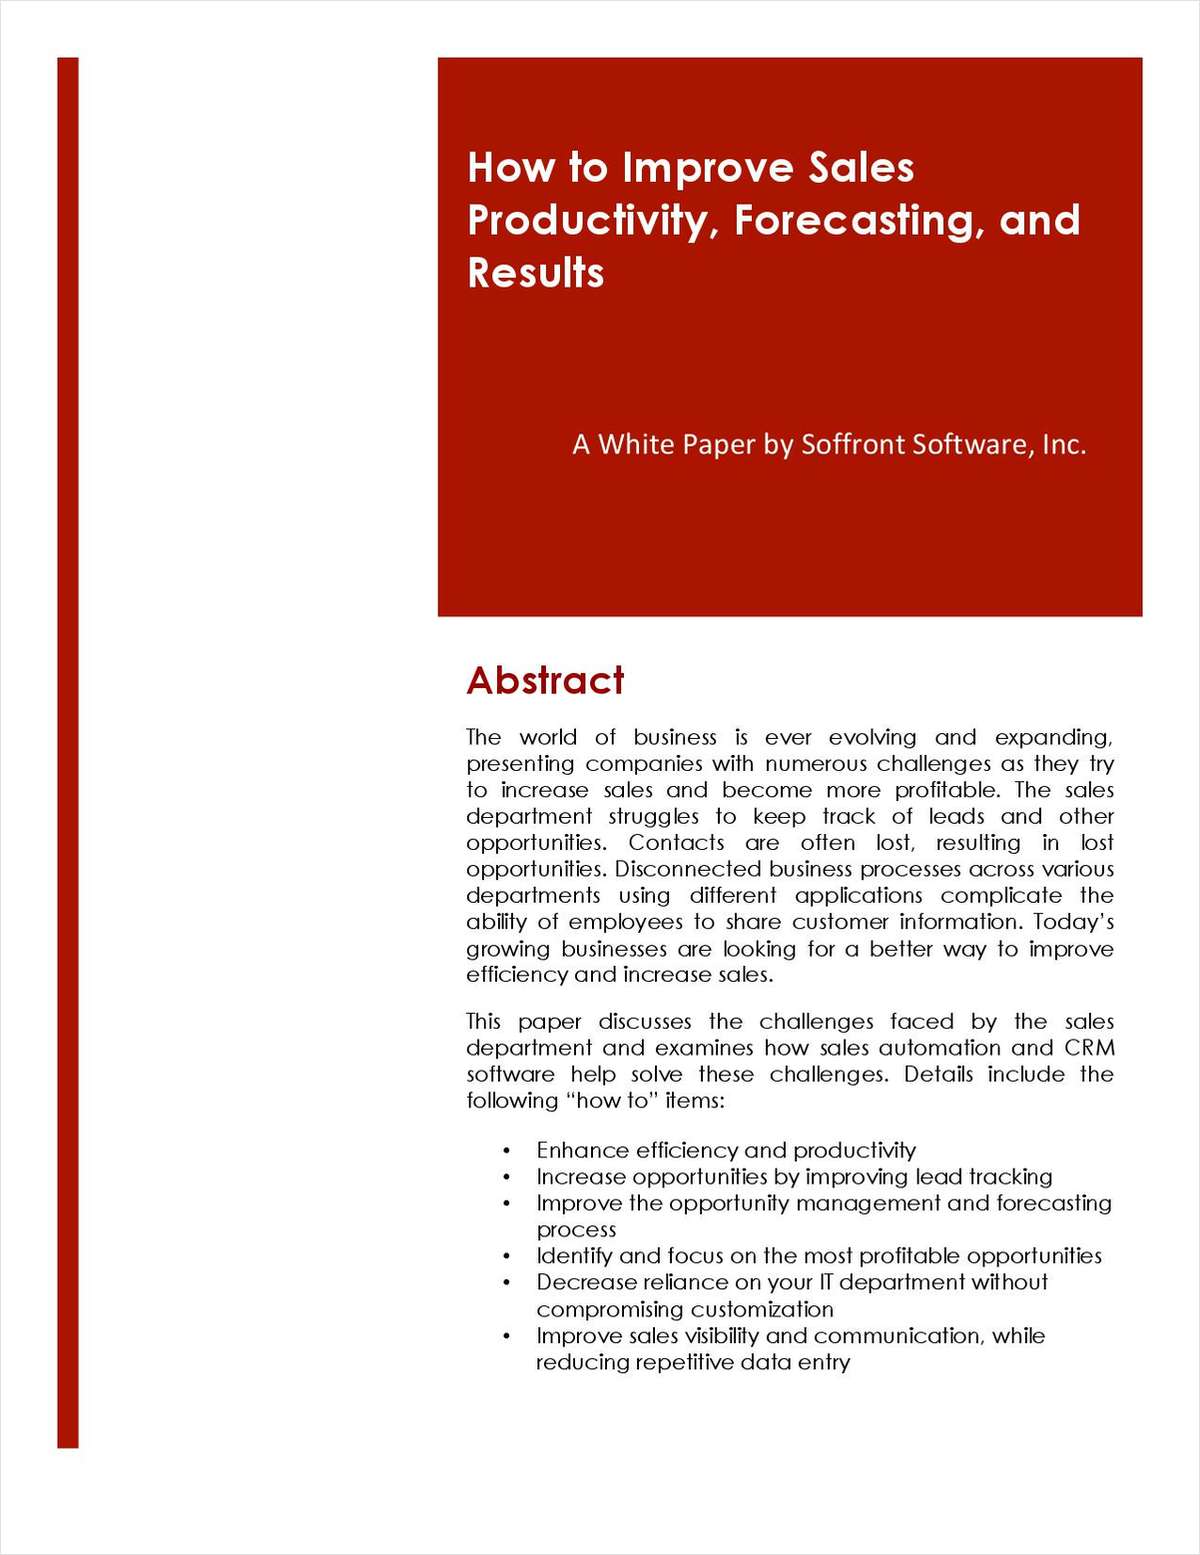 How to Improve Sales Productivity, Forecasting, and Results